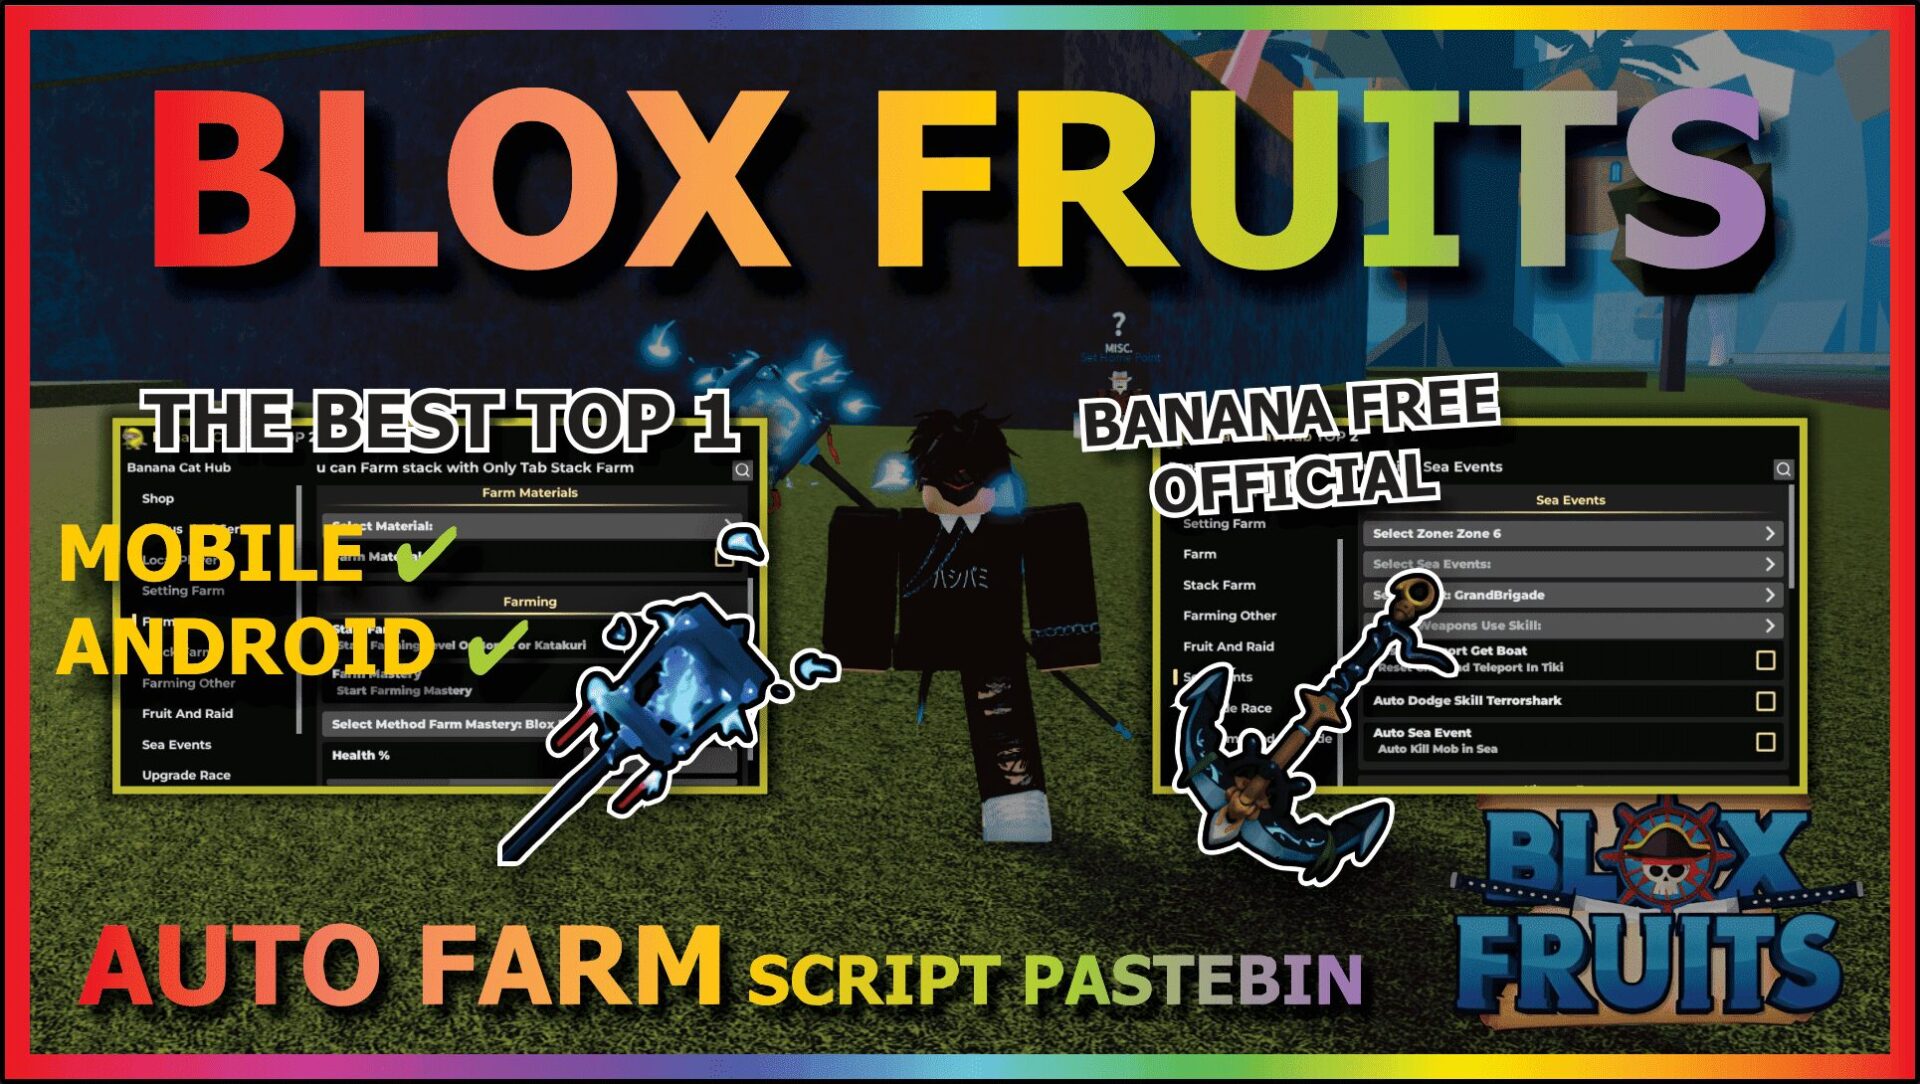 You are currently viewing BLOX FRUITS (BANANA FREE)